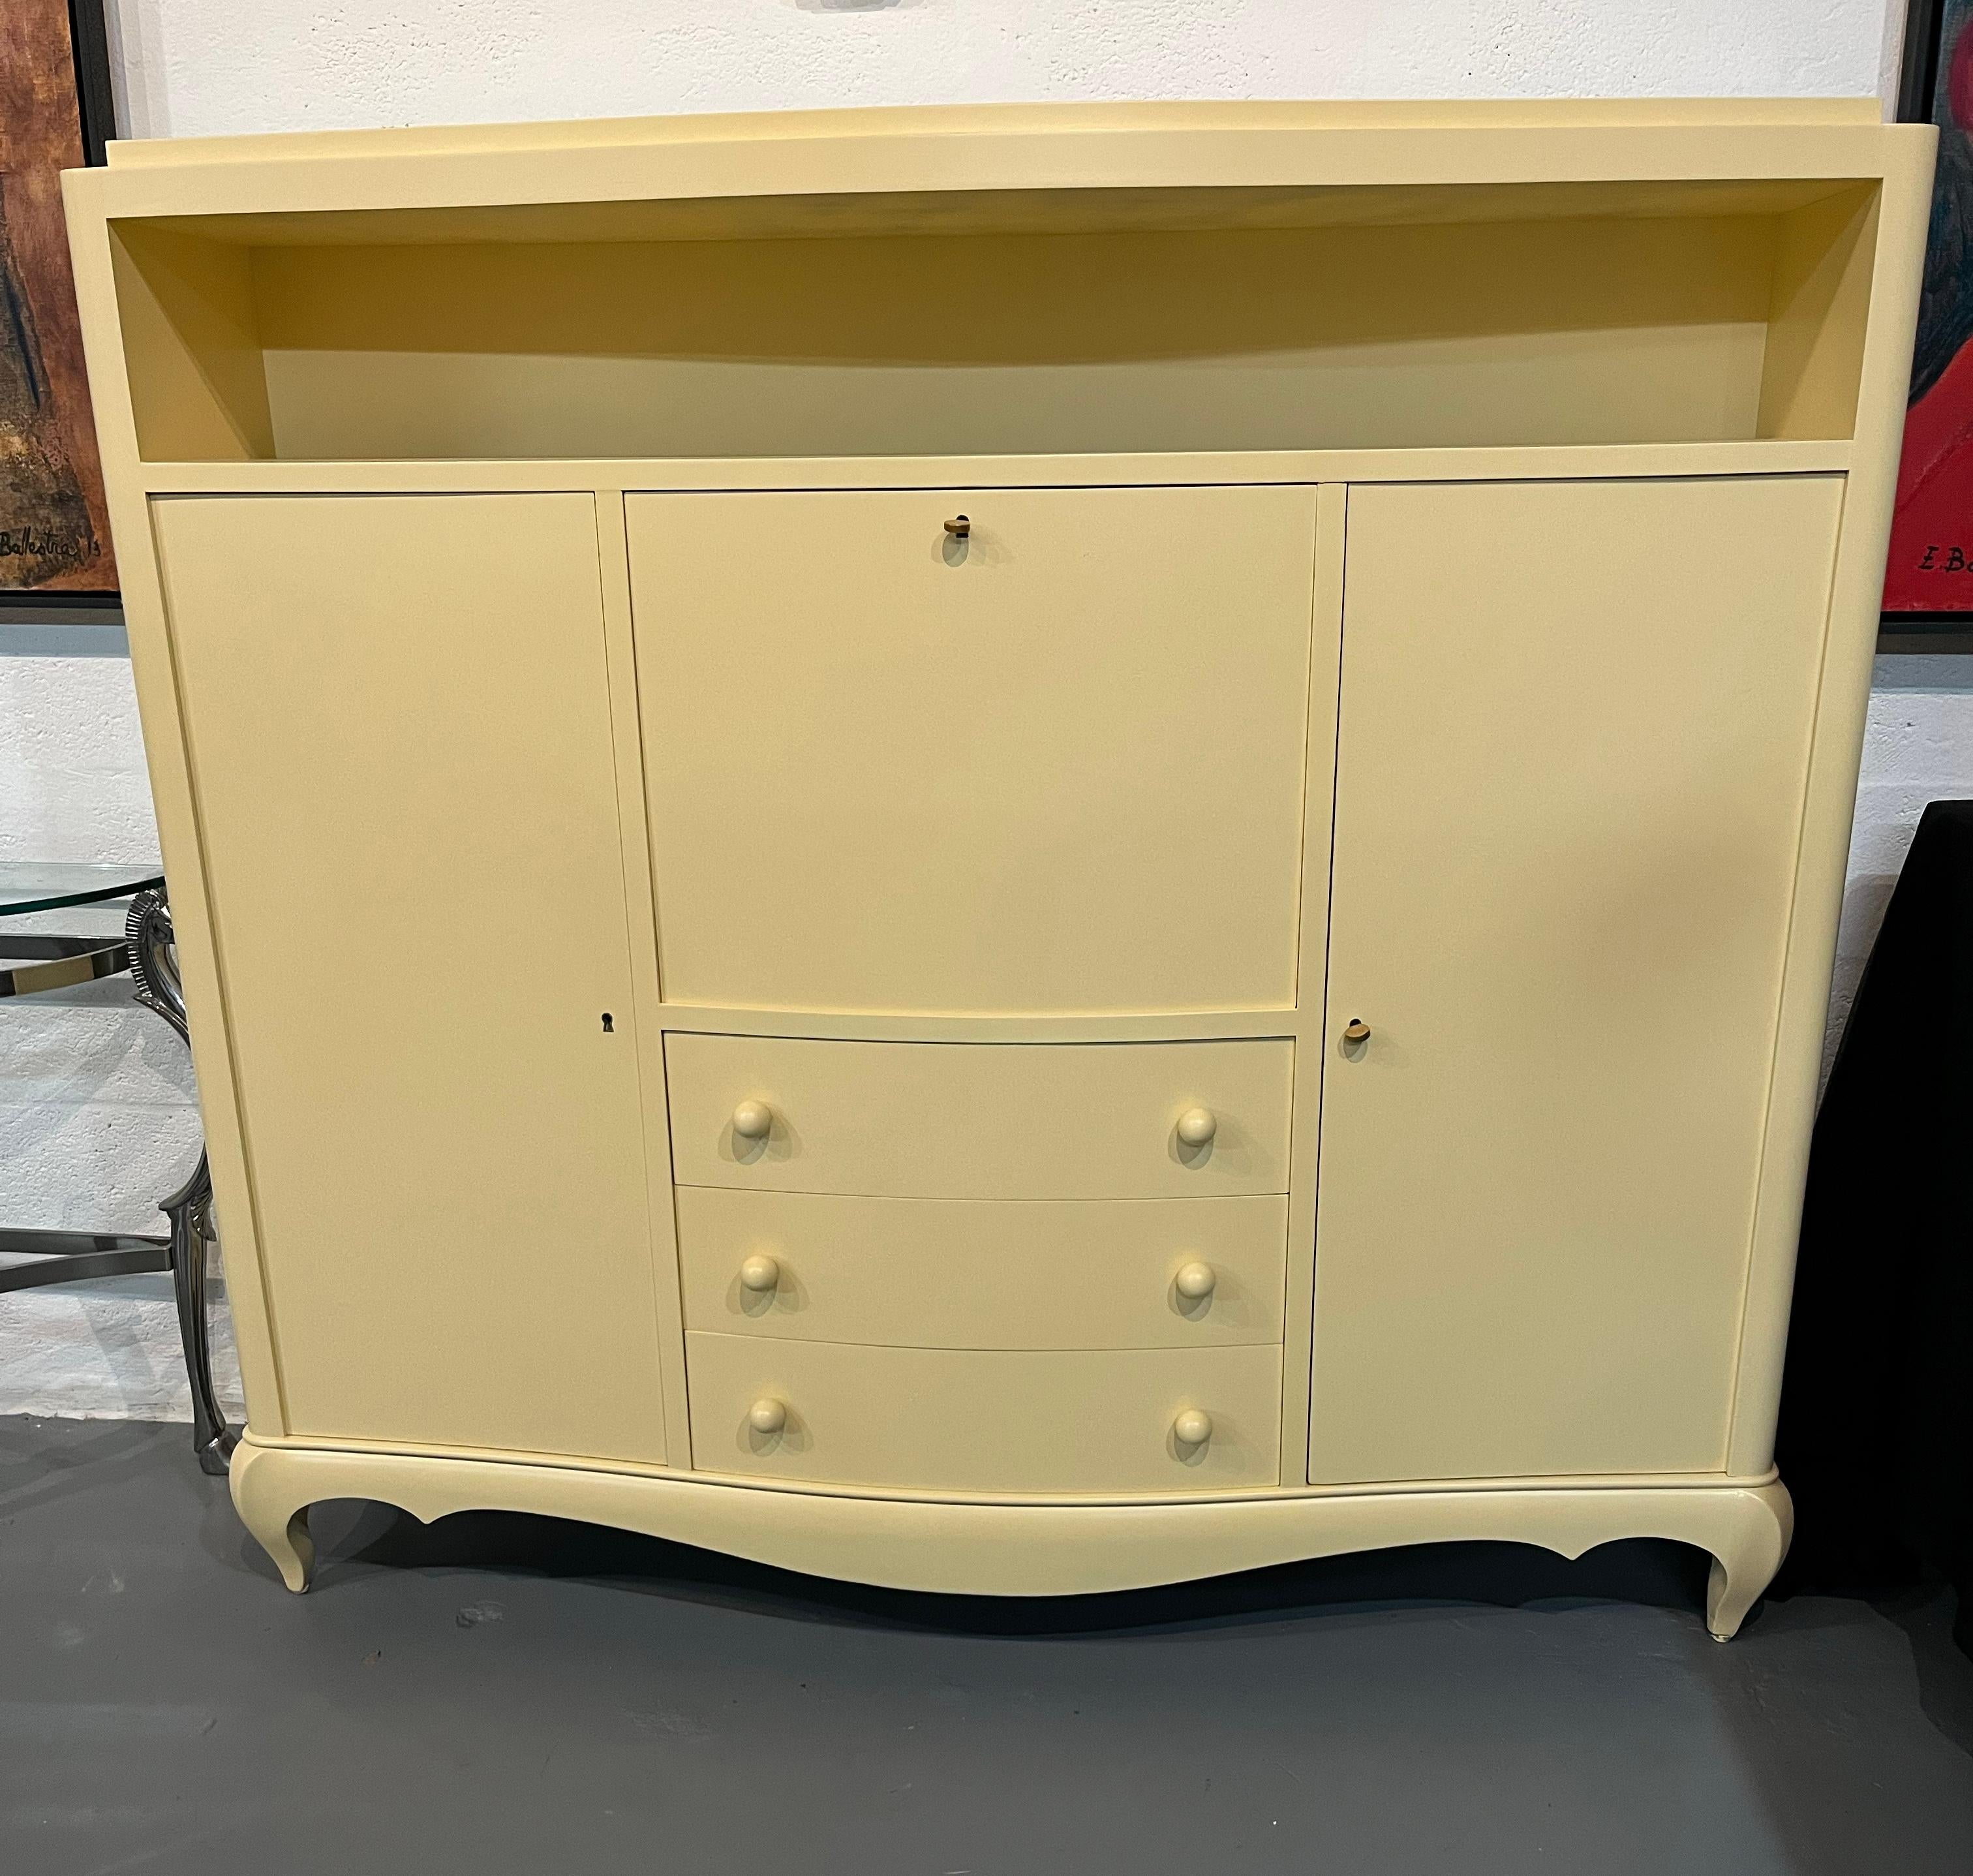 Very elegant and rare piece of furniture. This writing desk cabinet is in lacquered wood and has drawers and two side doors with shelves and bookcase compartments on the top. Refinished in precious ivory color lacquer.
The cabinet is standing on a